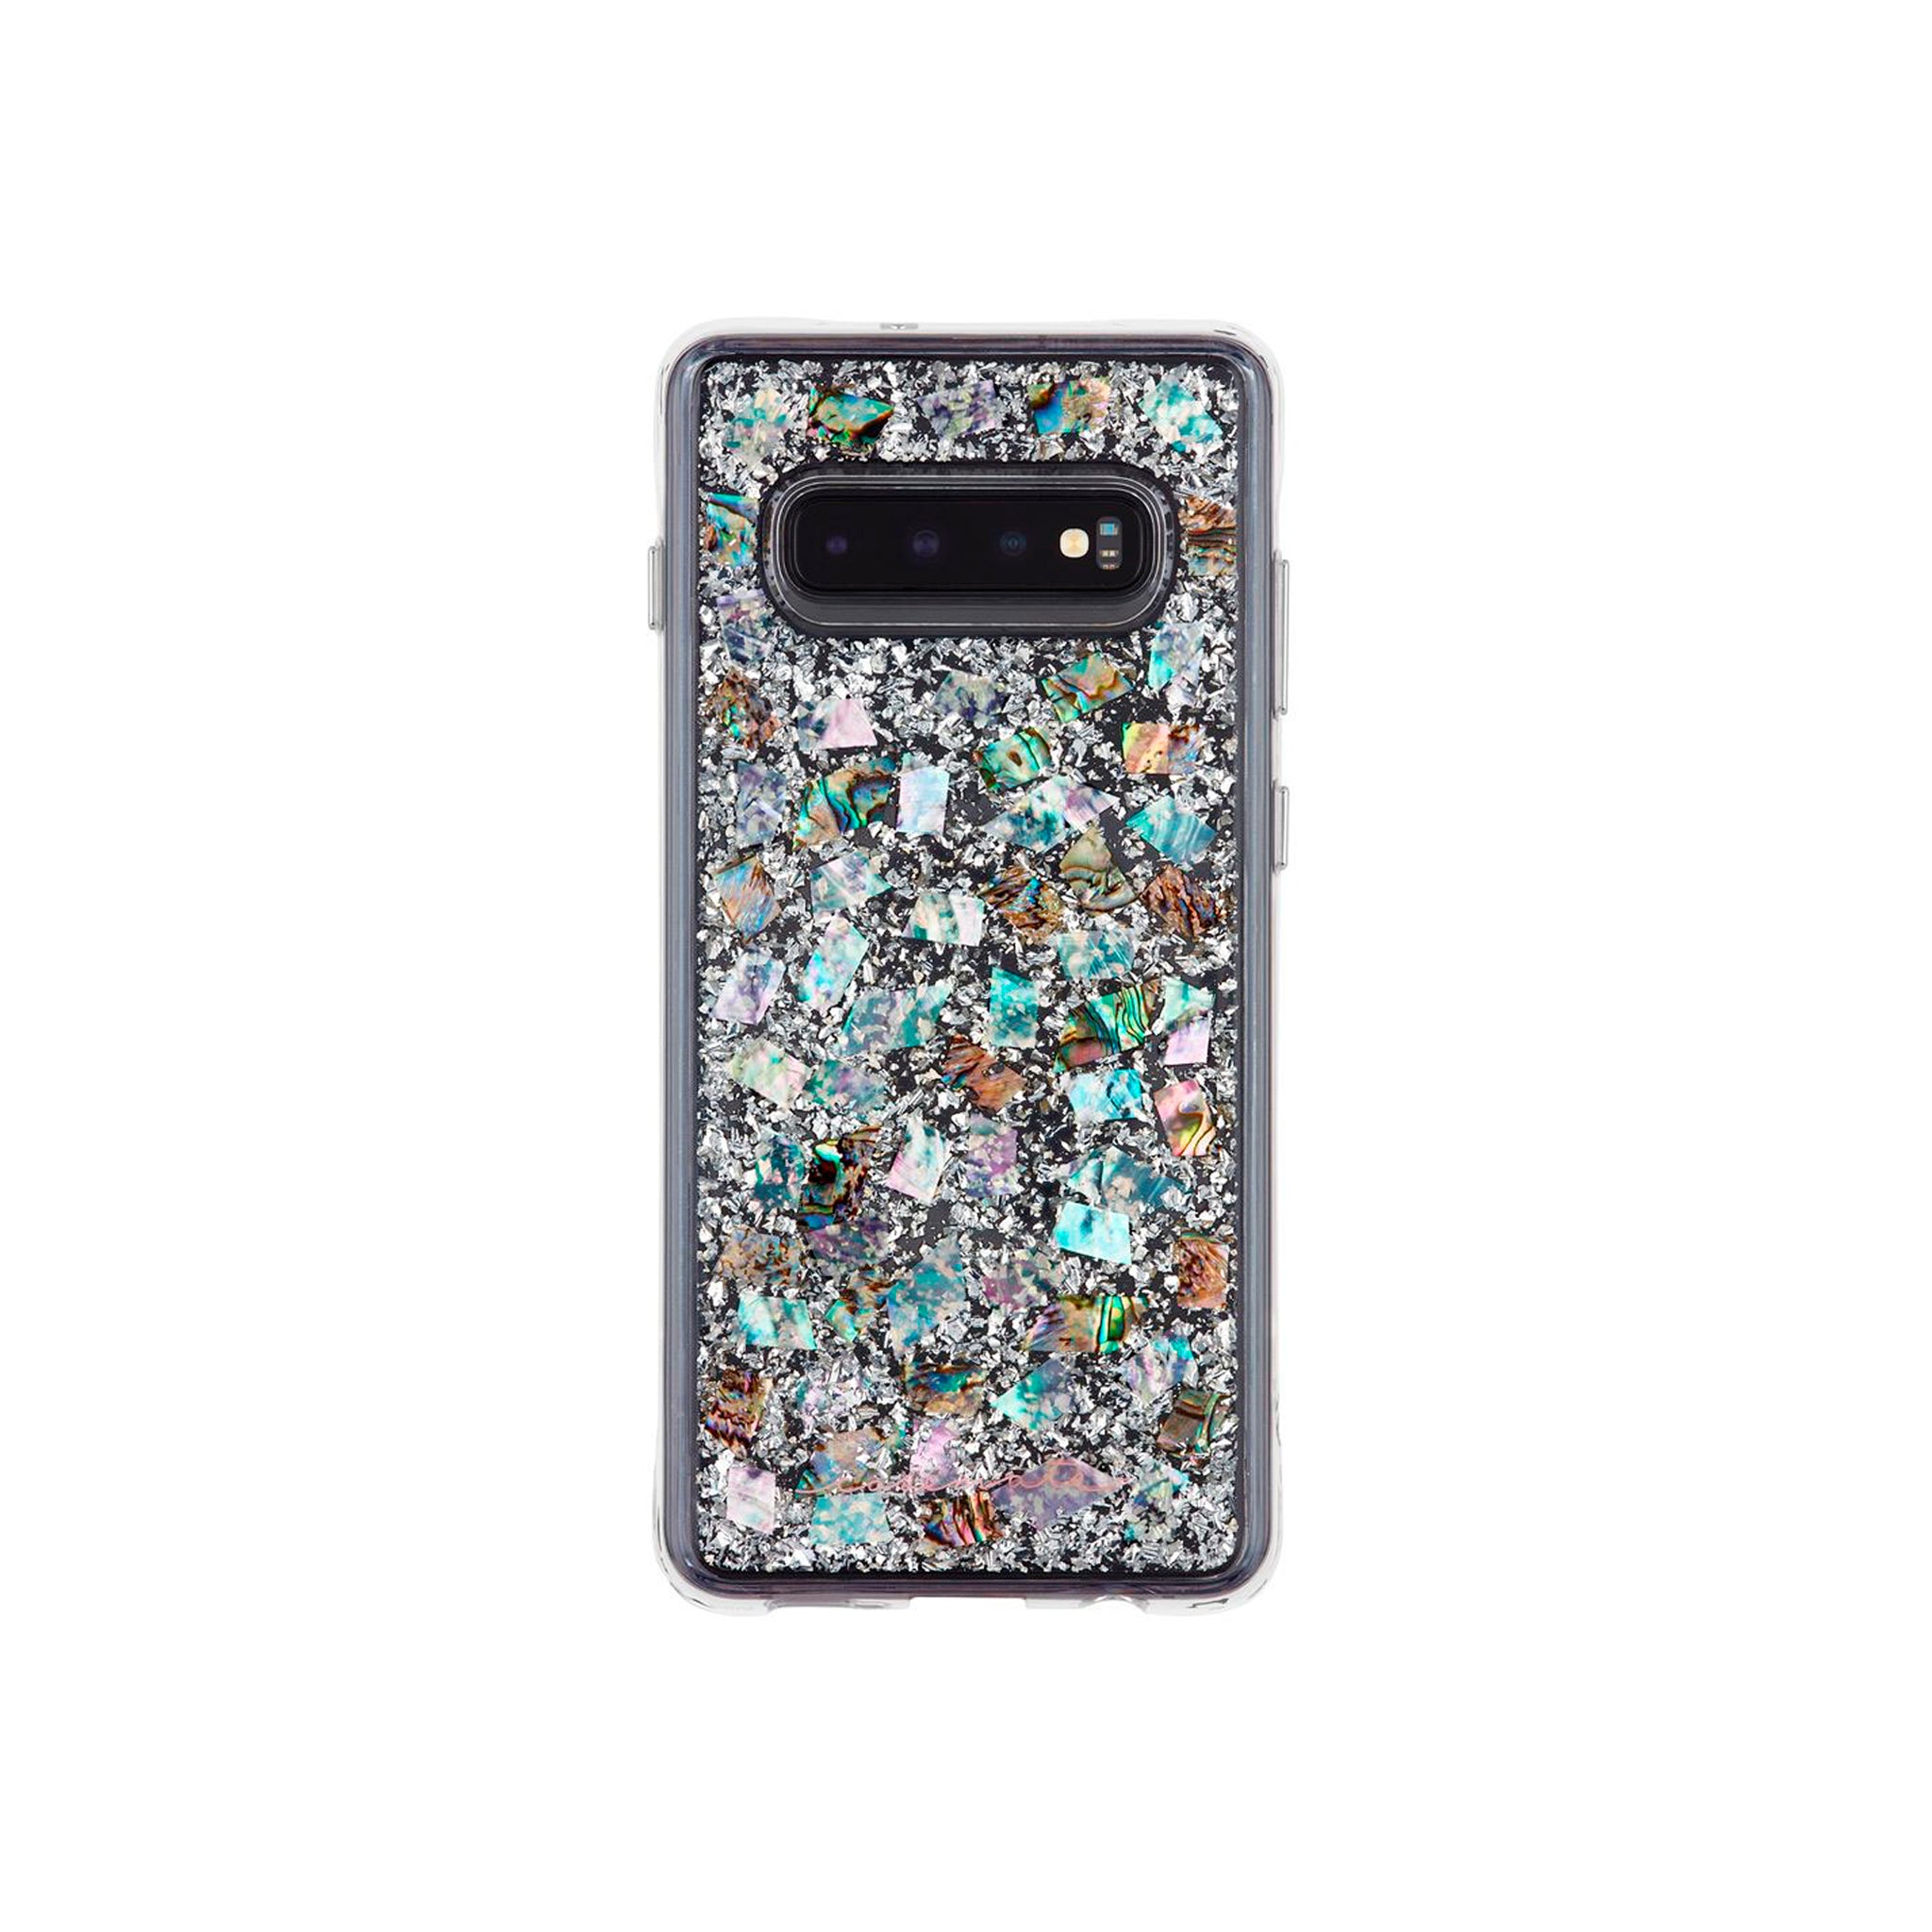 Case-mate - Karat Case For Samsung Galaxy S10 Plus - Mother Of Pearl